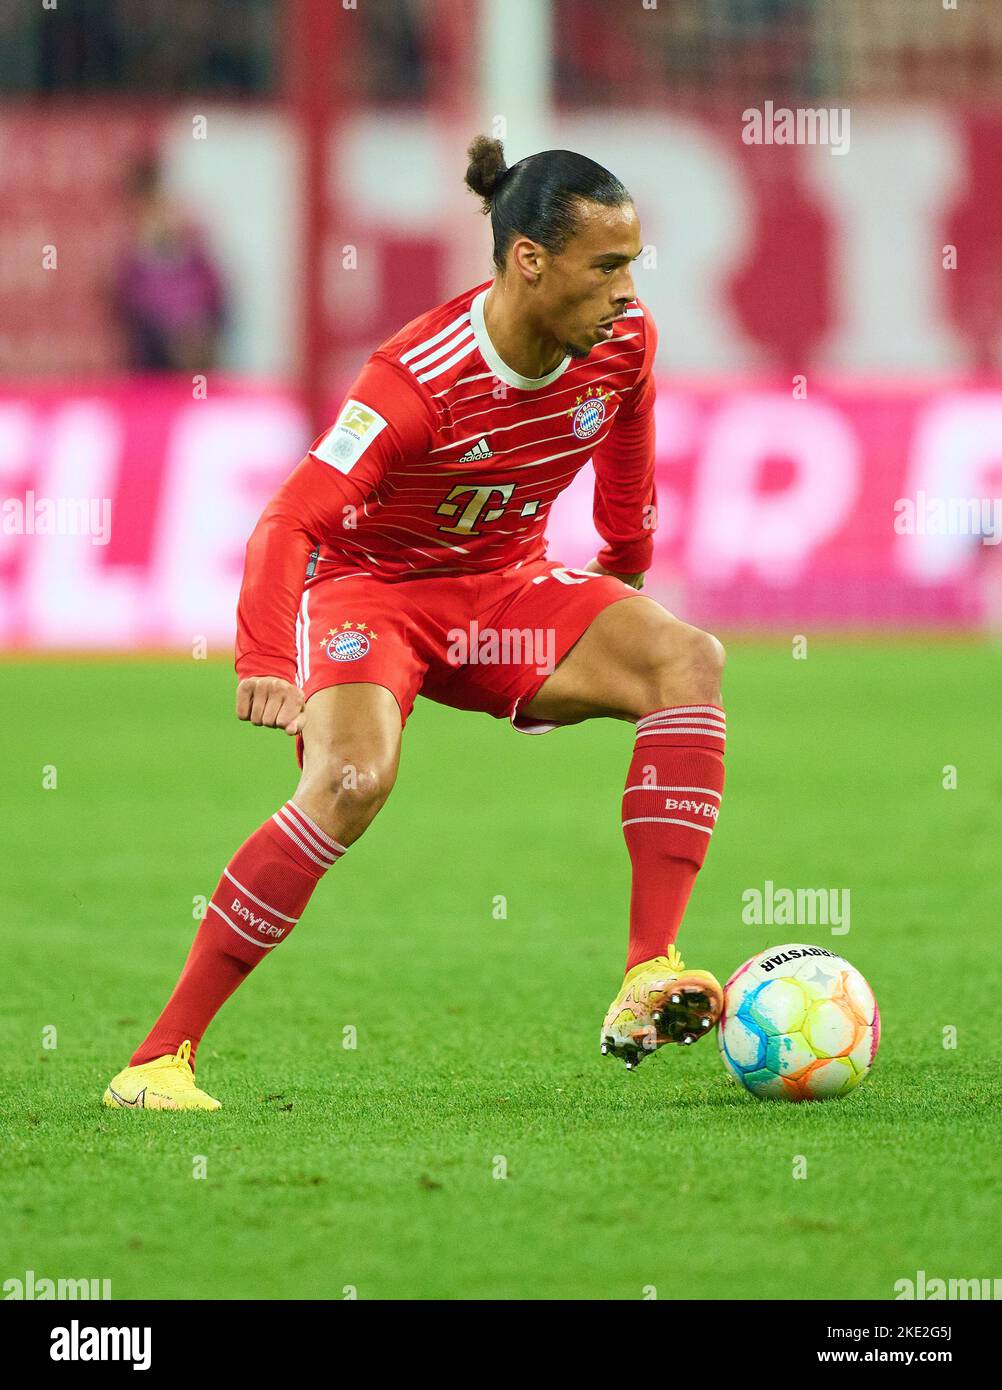 Leroy SANE, FCB 10  in the match FC BAYERN MÜNCHEN - SV WERDER BREMEN 6-1 1.German Football League on Nov 8, 2022 in Munich, Germany. Season 2022/2023, matchday 14, 1.Bundesliga, FCB, München, 14.Spieltag © Peter Schatz / Alamy Live News    - DFL REGULATIONS PROHIBIT ANY USE OF PHOTOGRAPHS as IMAGE SEQUENCES and/or QUASI-VIDEO - Stock Photo